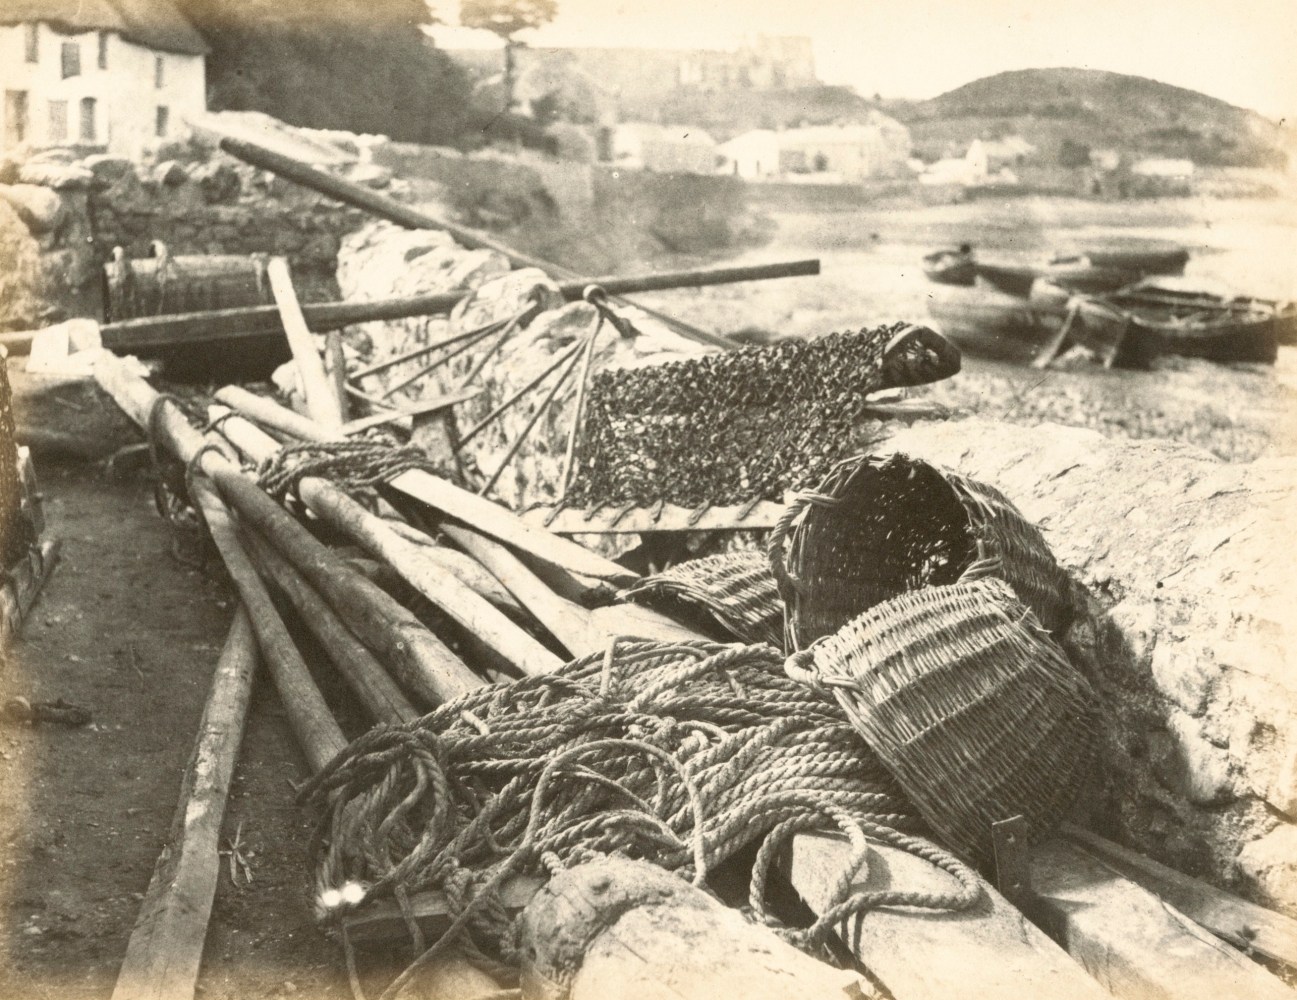 Hugh OWEN (English, 1808-1897) Dredges and baskets at Oystermouth, The Gower Albumen print, 1860s-1870s, from a paper negative, before 1855 17.3 x 22.4 cm mounted on 26.0 x 28.3 cm album sheet Numbered &quot;71&quot; in pencil on mount